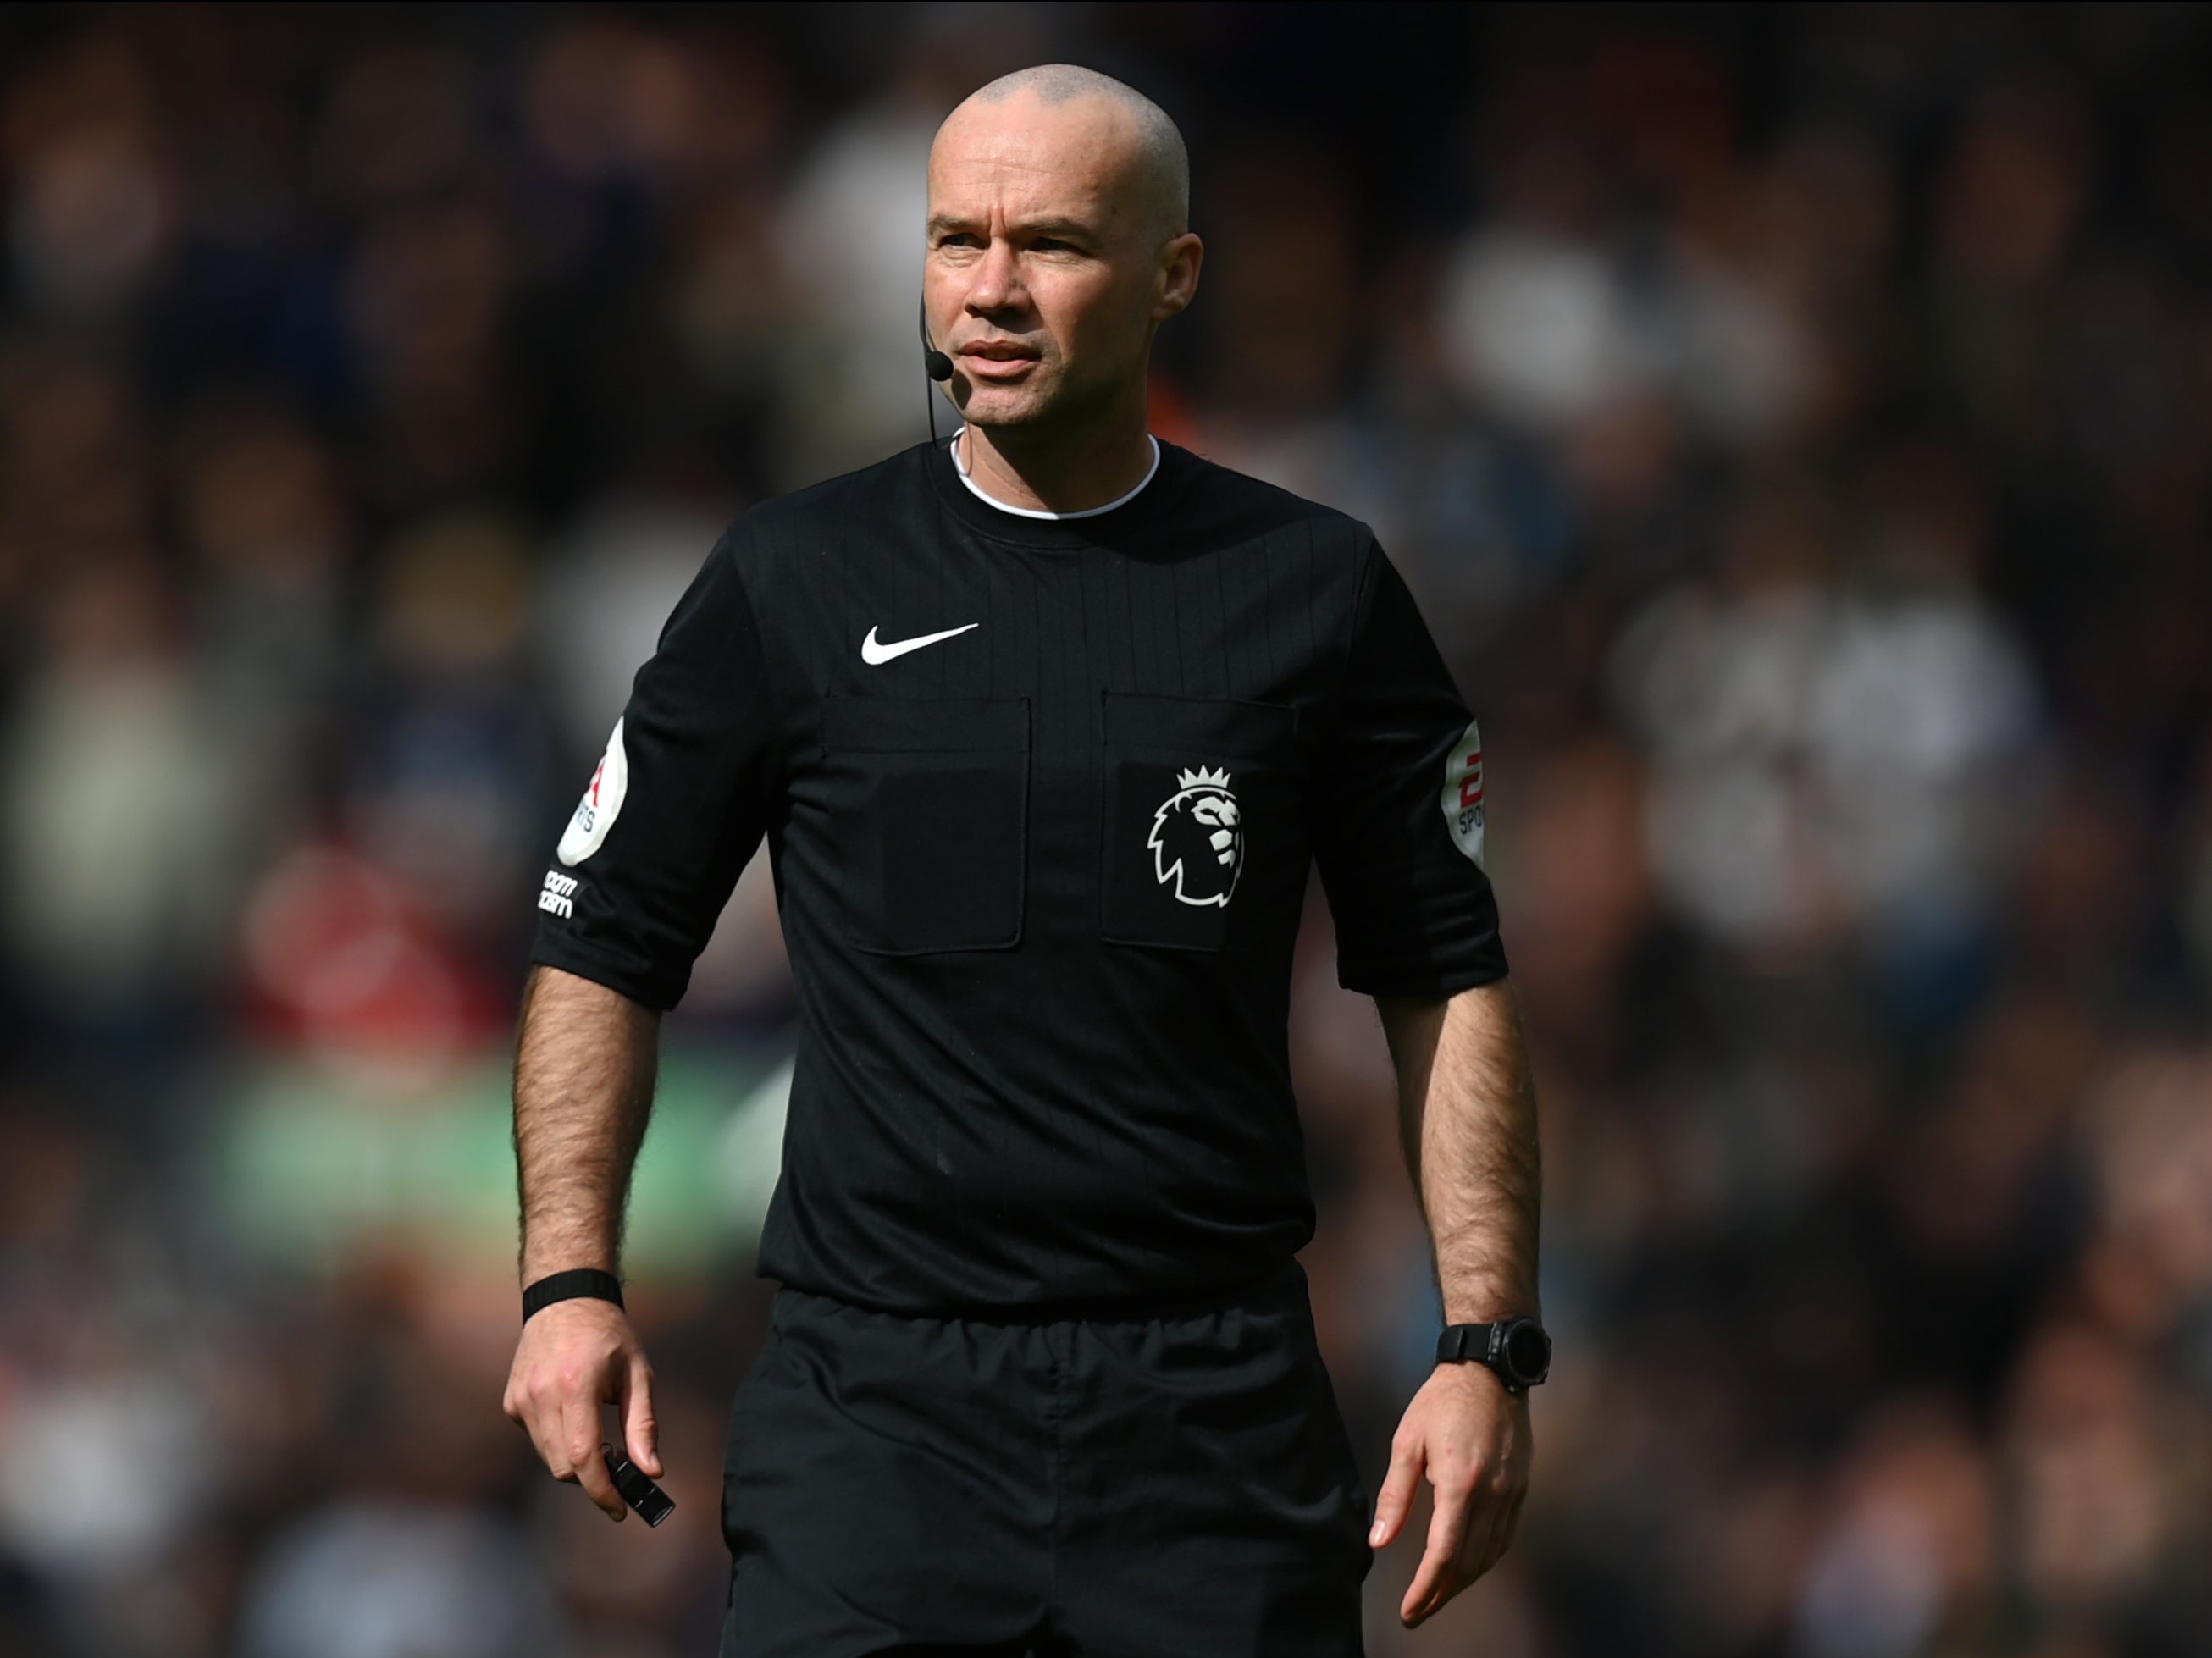 Paul Tierney will take charge of the Wembley cup decider